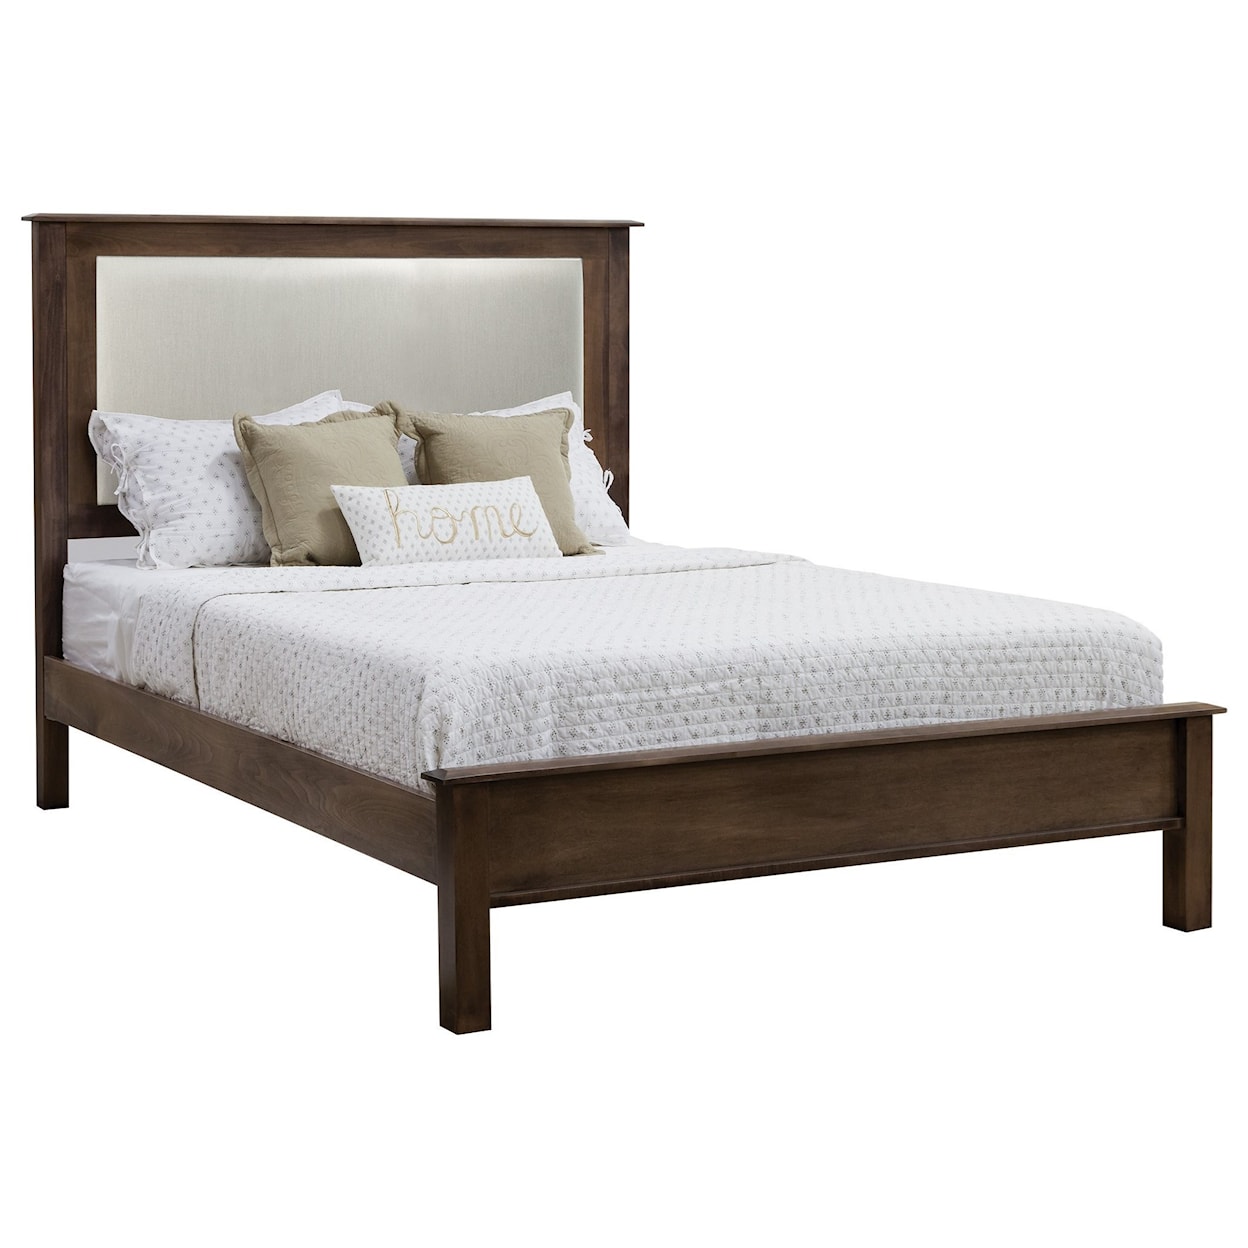 Daniel's Amish Manchester Queen Single Panel Fabric Bed